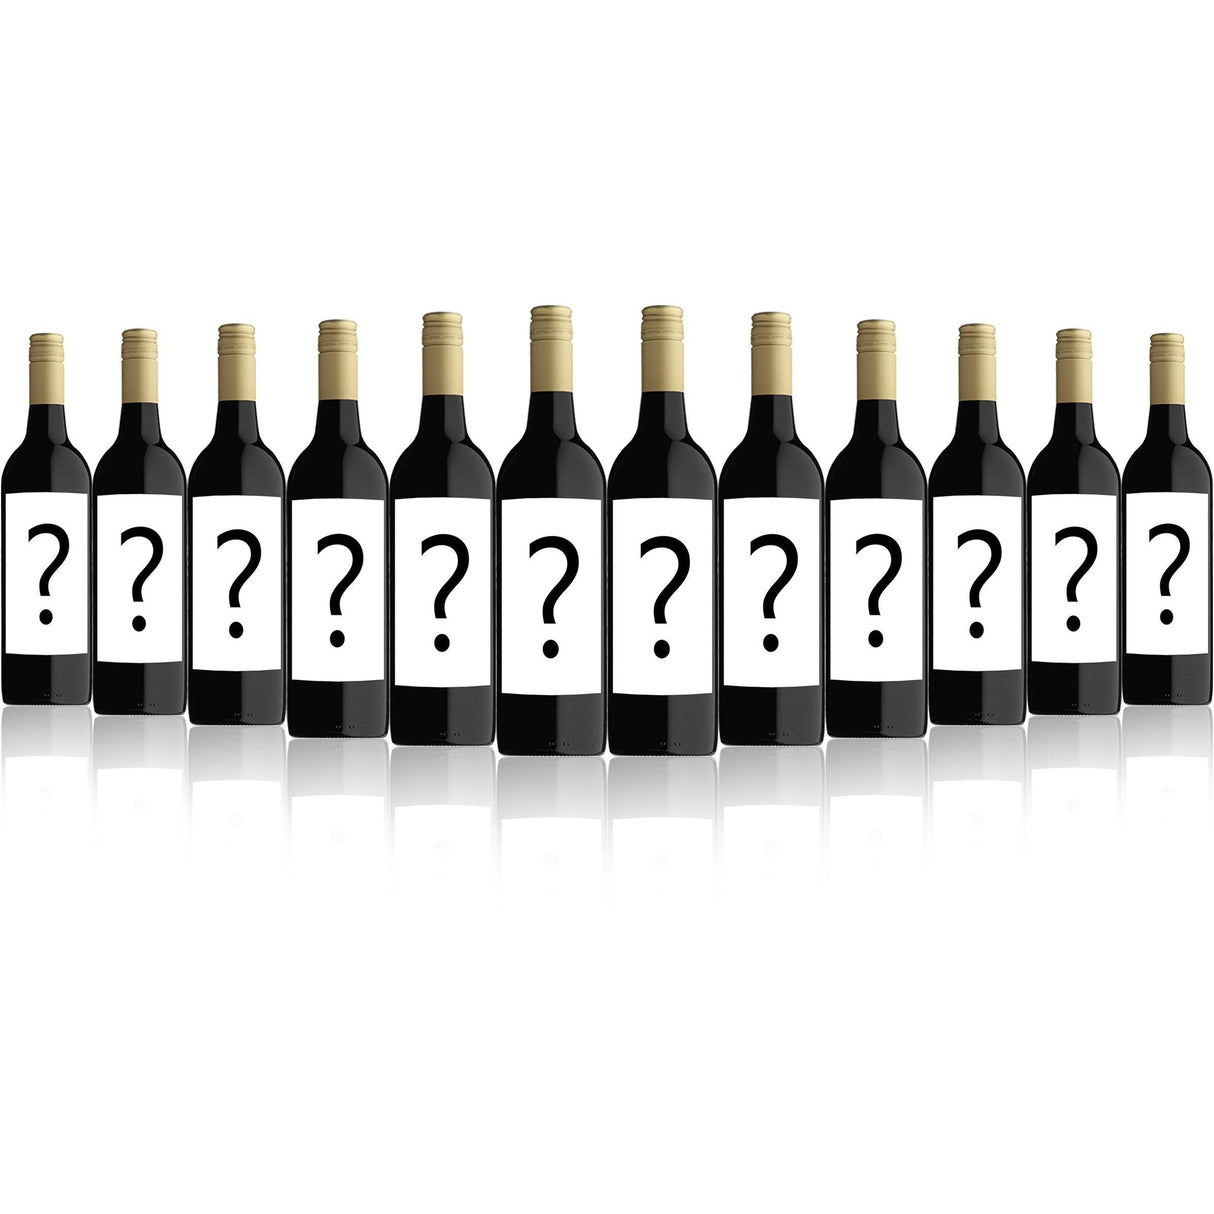 Premium Mystery Mixed Red Wine (12 bottles)